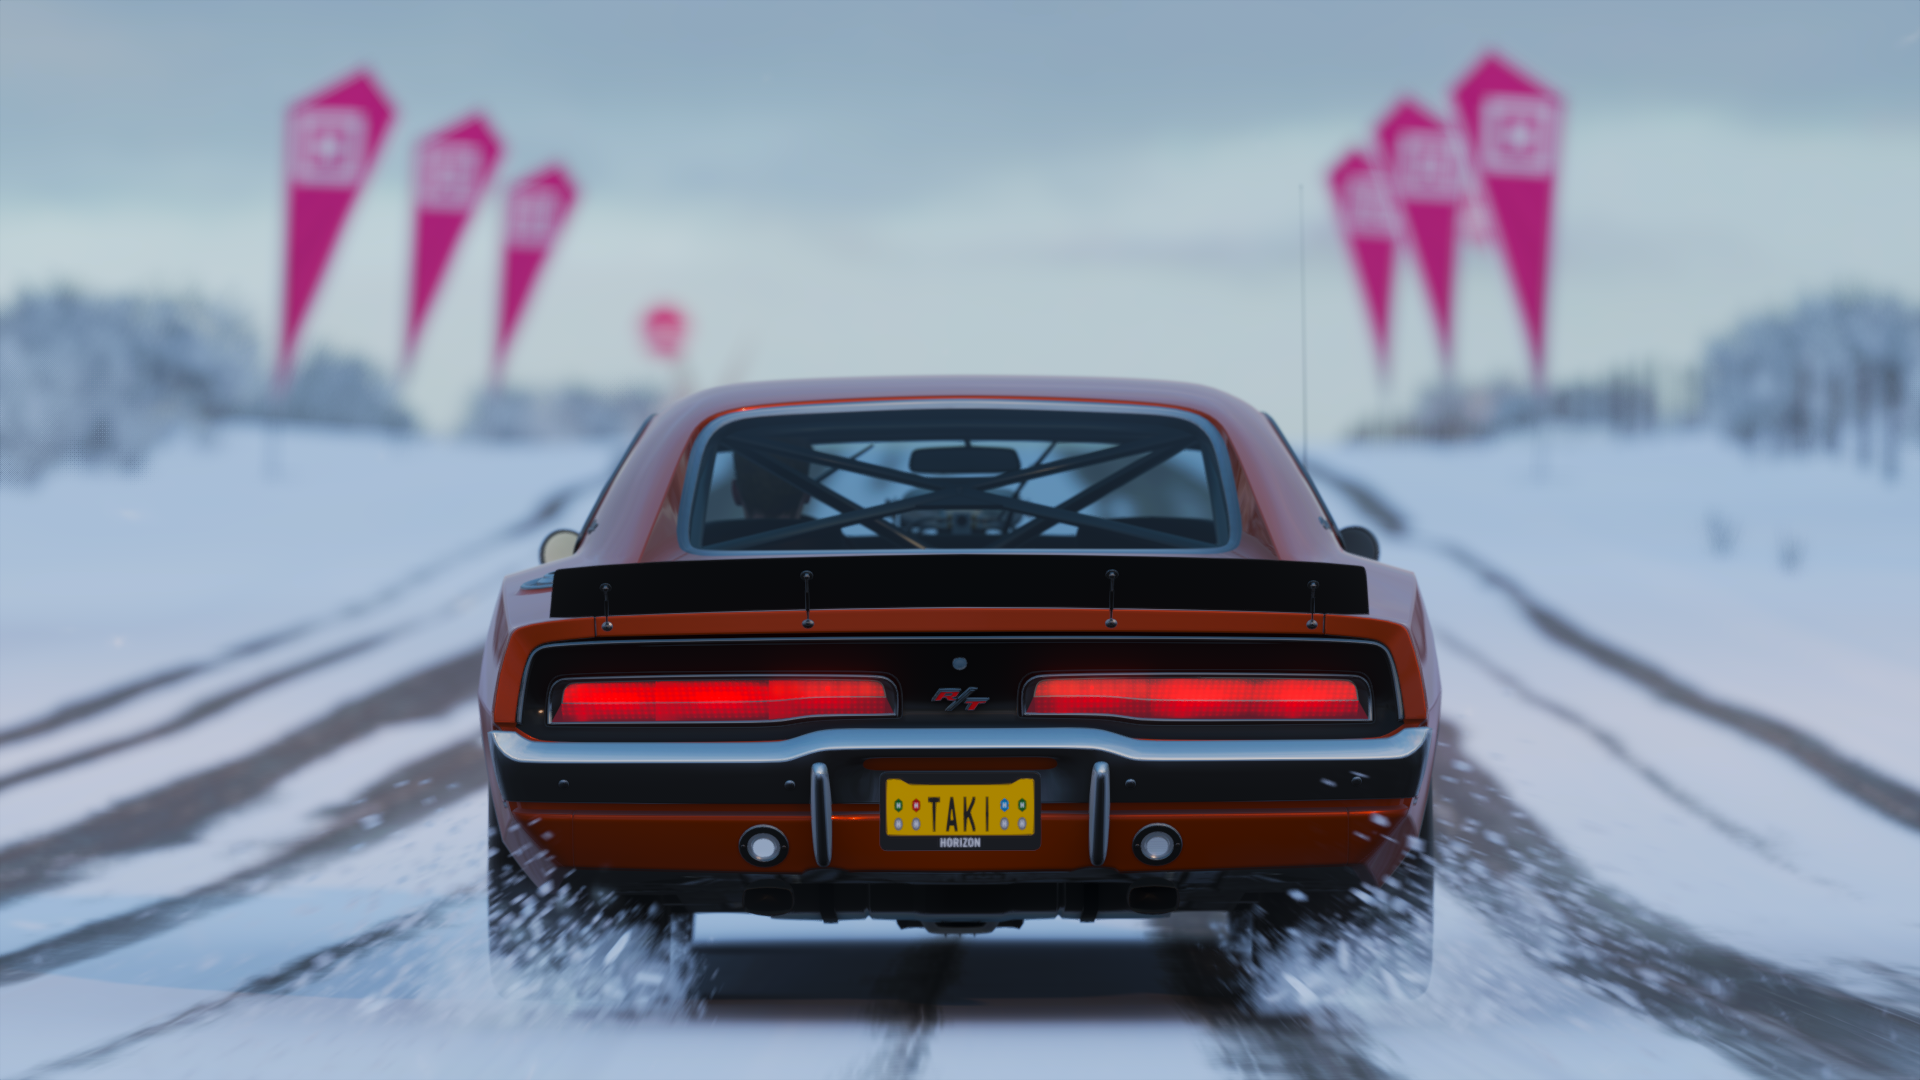 Forza Horizon 4 Car Racing Dodge Dodge Charger Muscle Cars V8 Engine American Cars Turn 10 Studios P 1920x1080